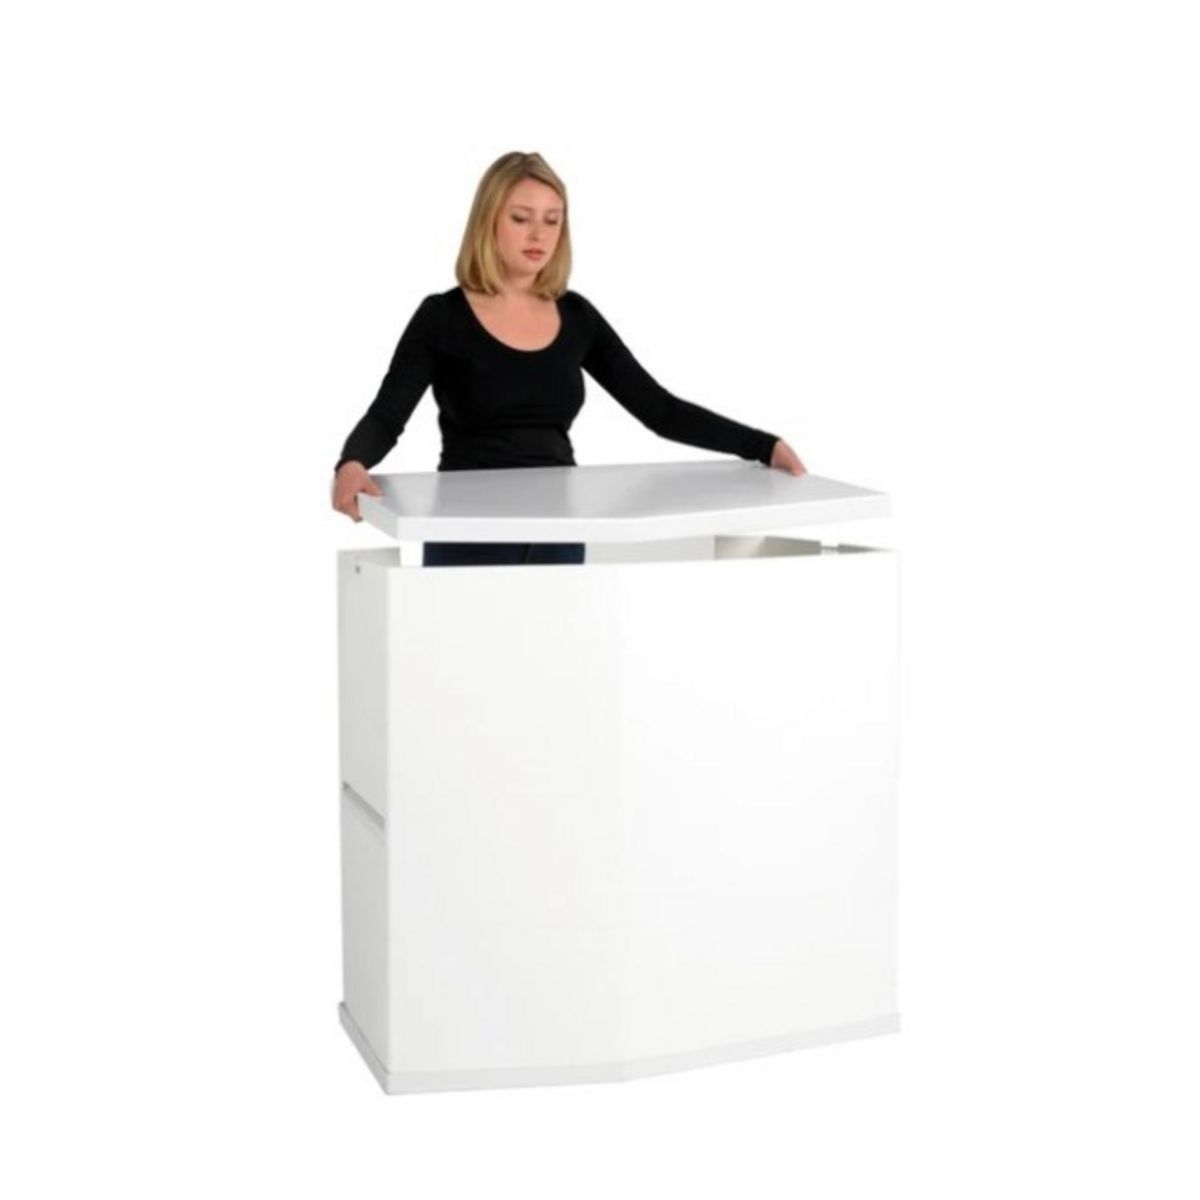 Lady adding Action counter top to the body panel of the promotional display counter..jpg